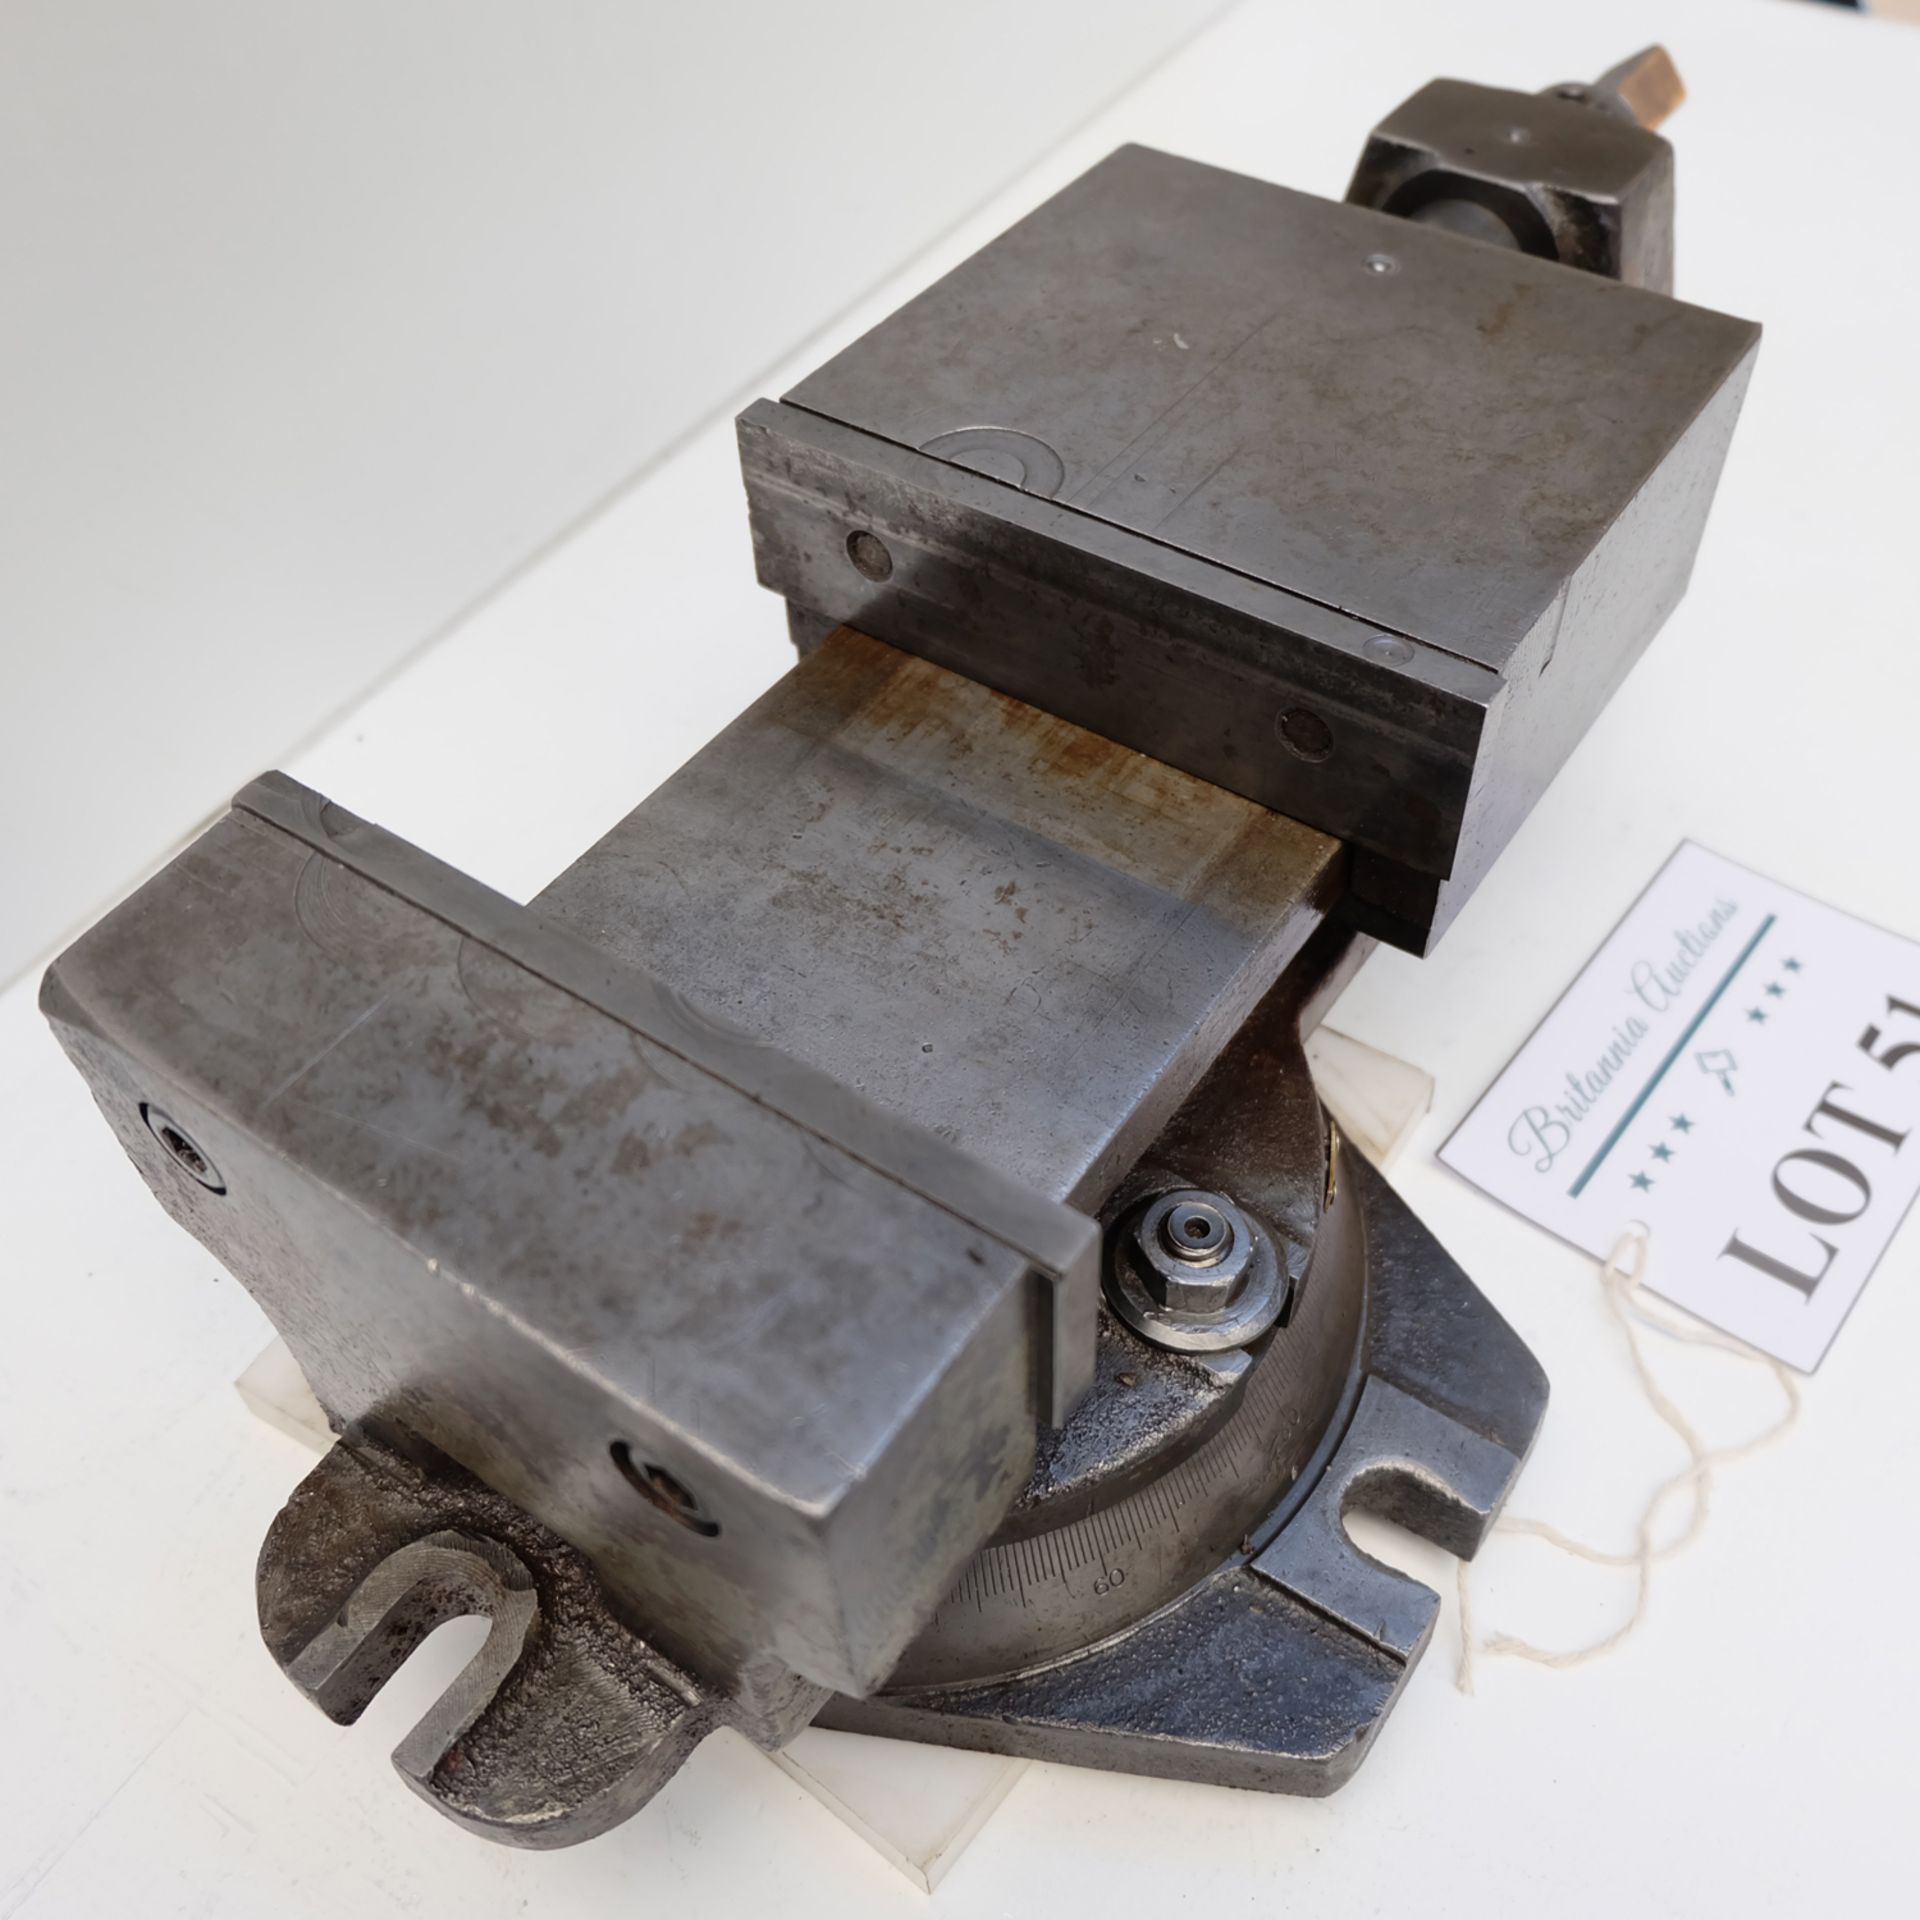 Swivelling Machine Vice. Jaw Width 6". Max Opening 4 1/4". Jaw Height 1 1/2" Approx. - Image 2 of 4